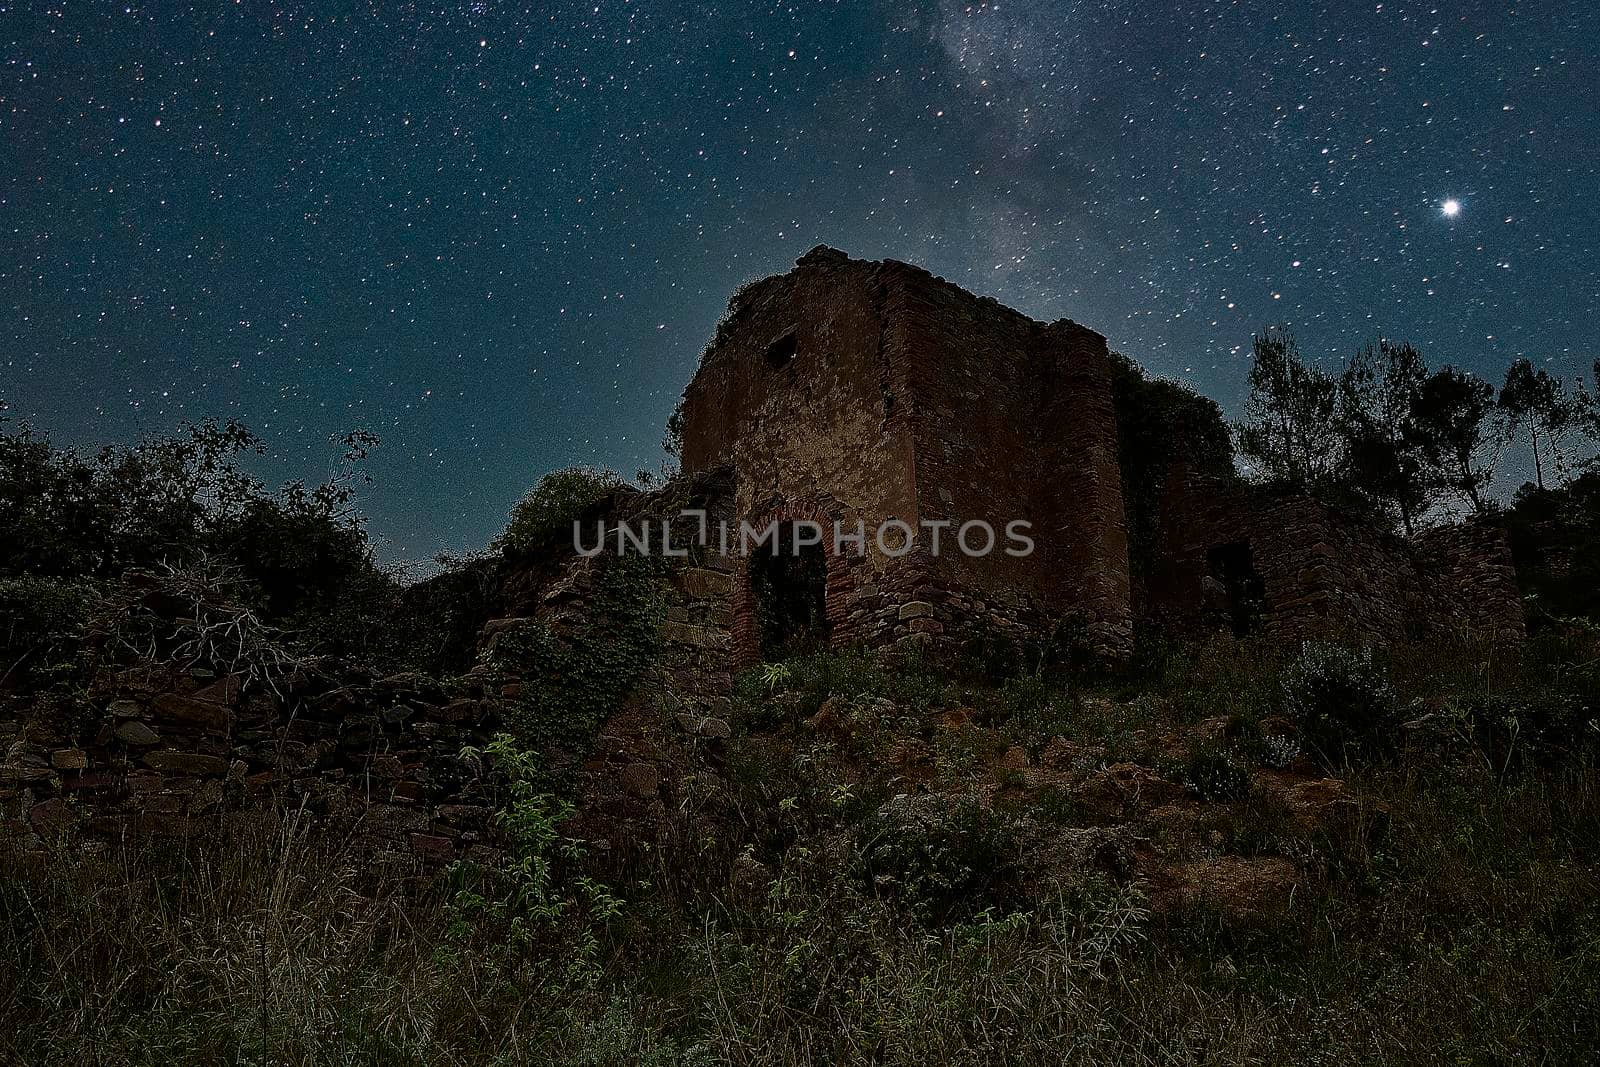 Jinquer, Castellon, Spain.tarry sky and Milky Way over an abandoned and destroyed church on top of a mountain. Solitaire, horror, fear, Spanish Civil War, texture, vegetation